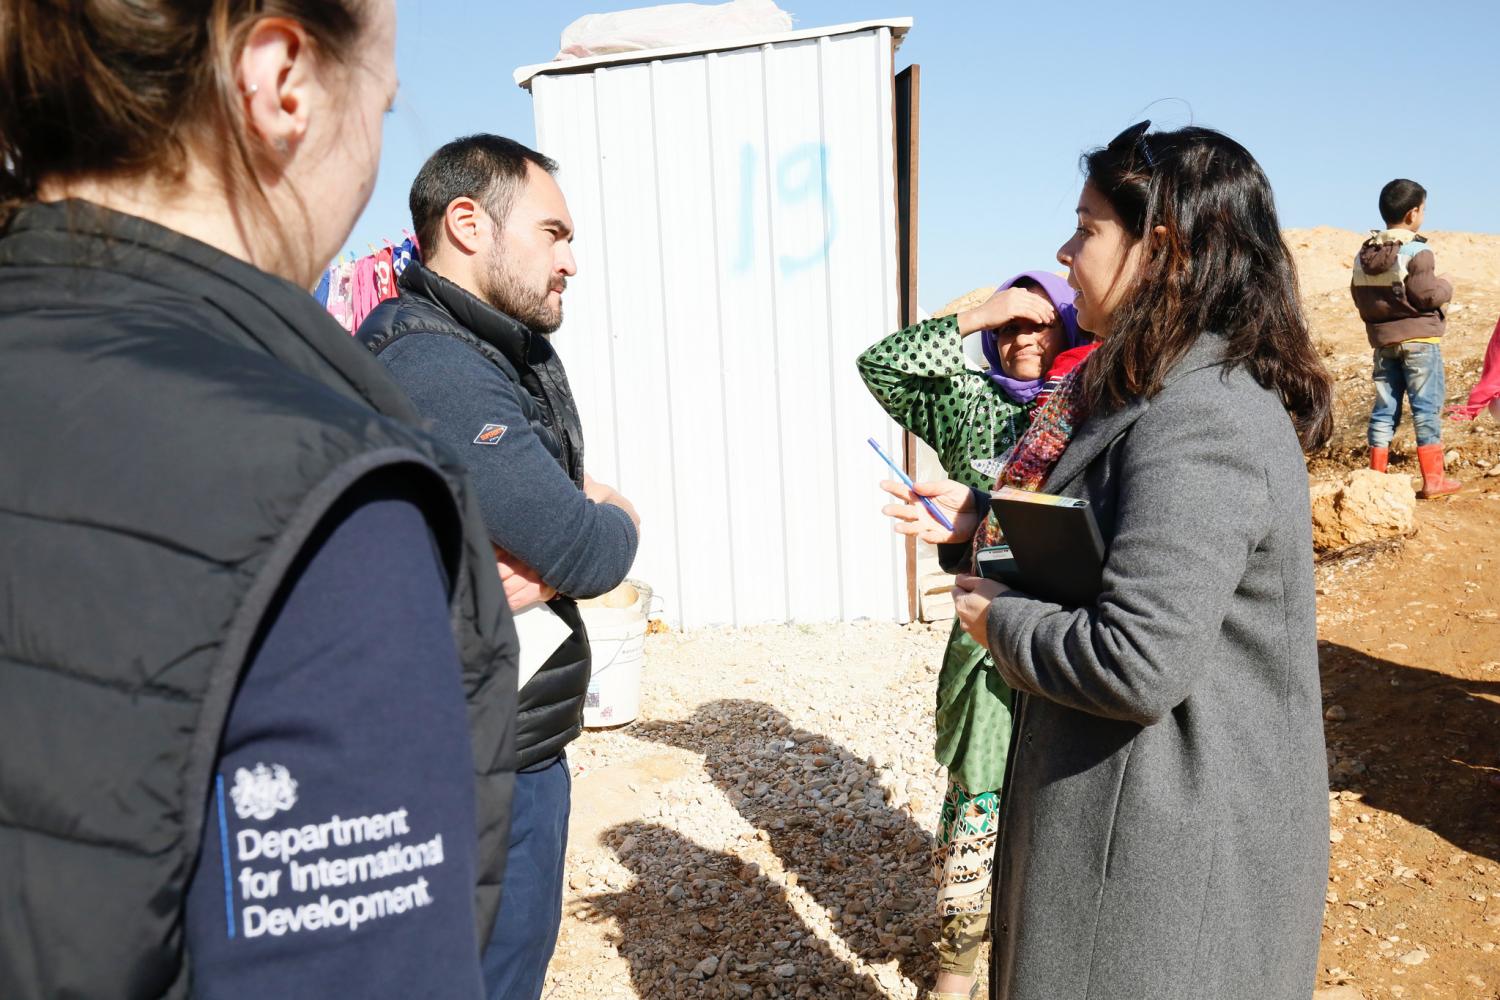 Humanitarian advisers from the U.K's Department for International Development talk to Syrian refugees in the Bekaa Valley, Lebanon, February 2017.